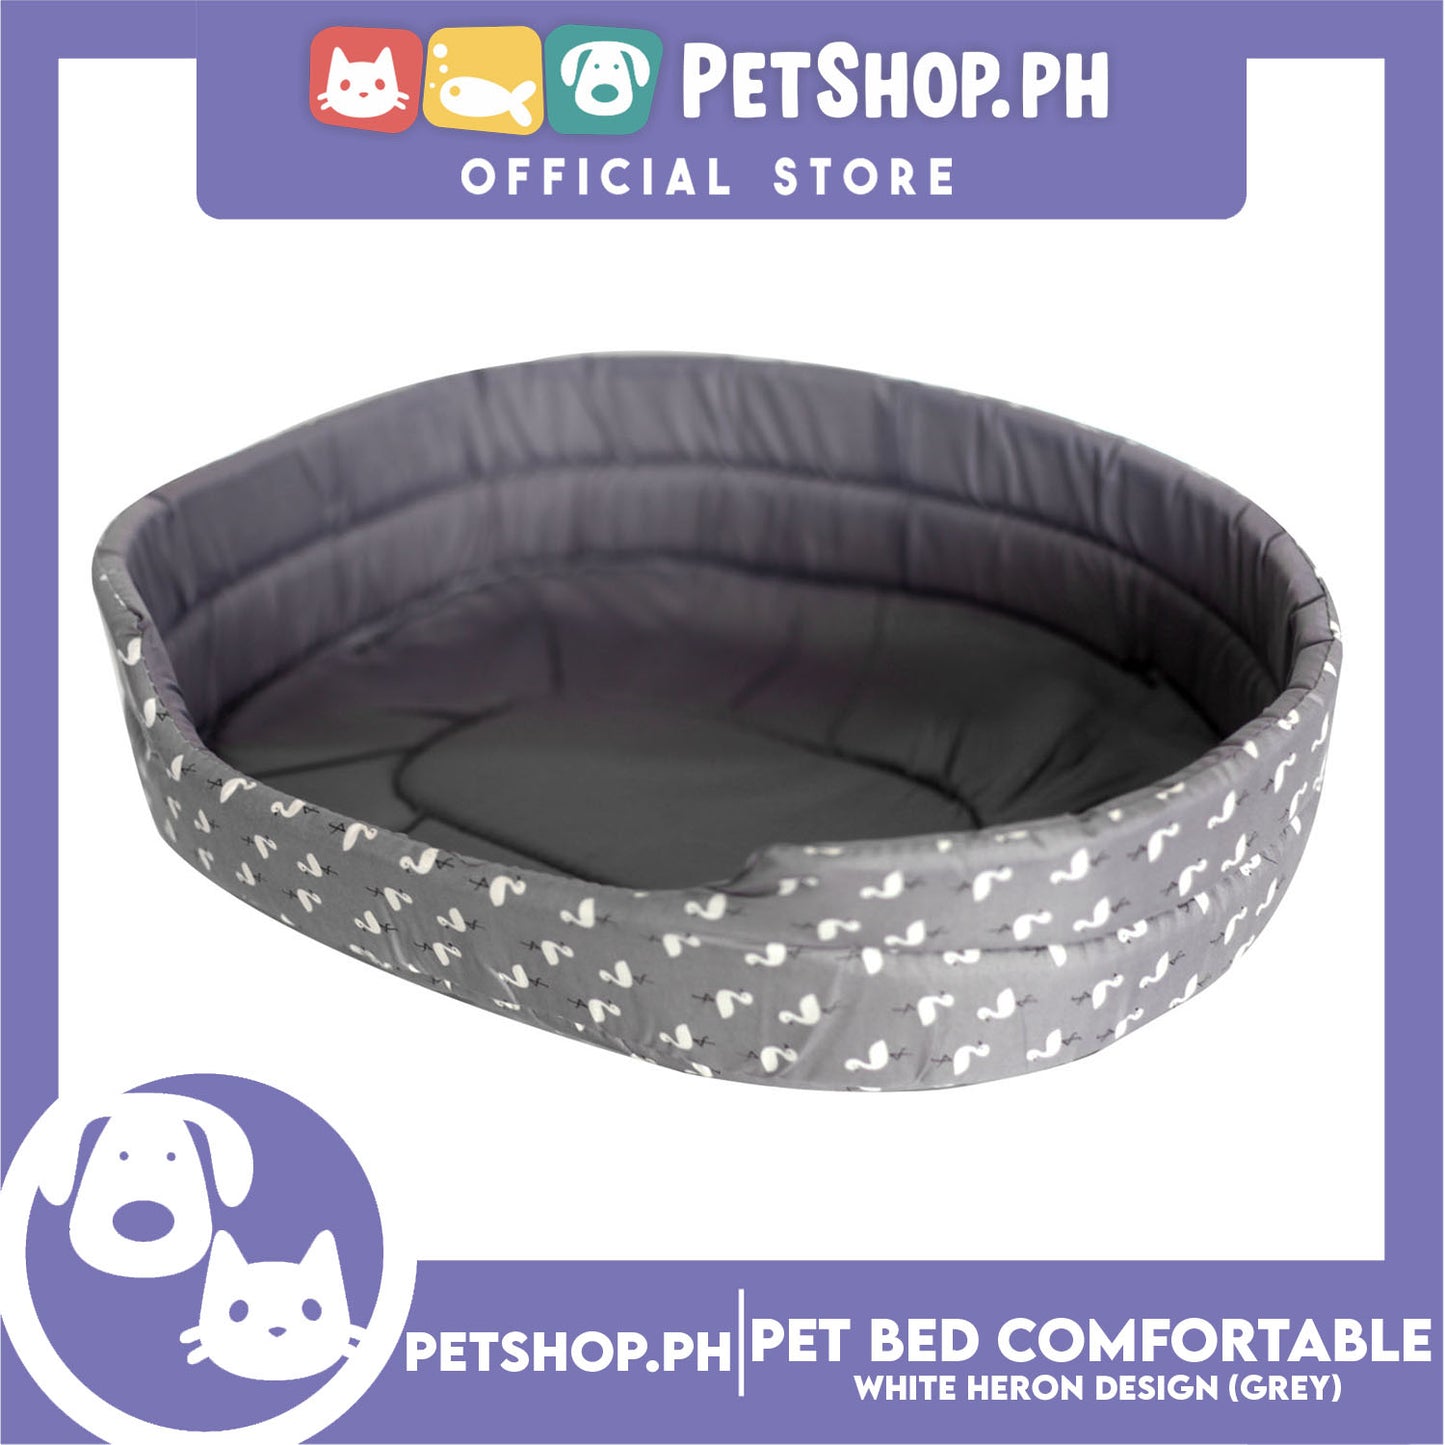 Pet Bed Comfortable Sleeping Bed with White Heron Design 58x45x14cm for Dogs & Cats Grey